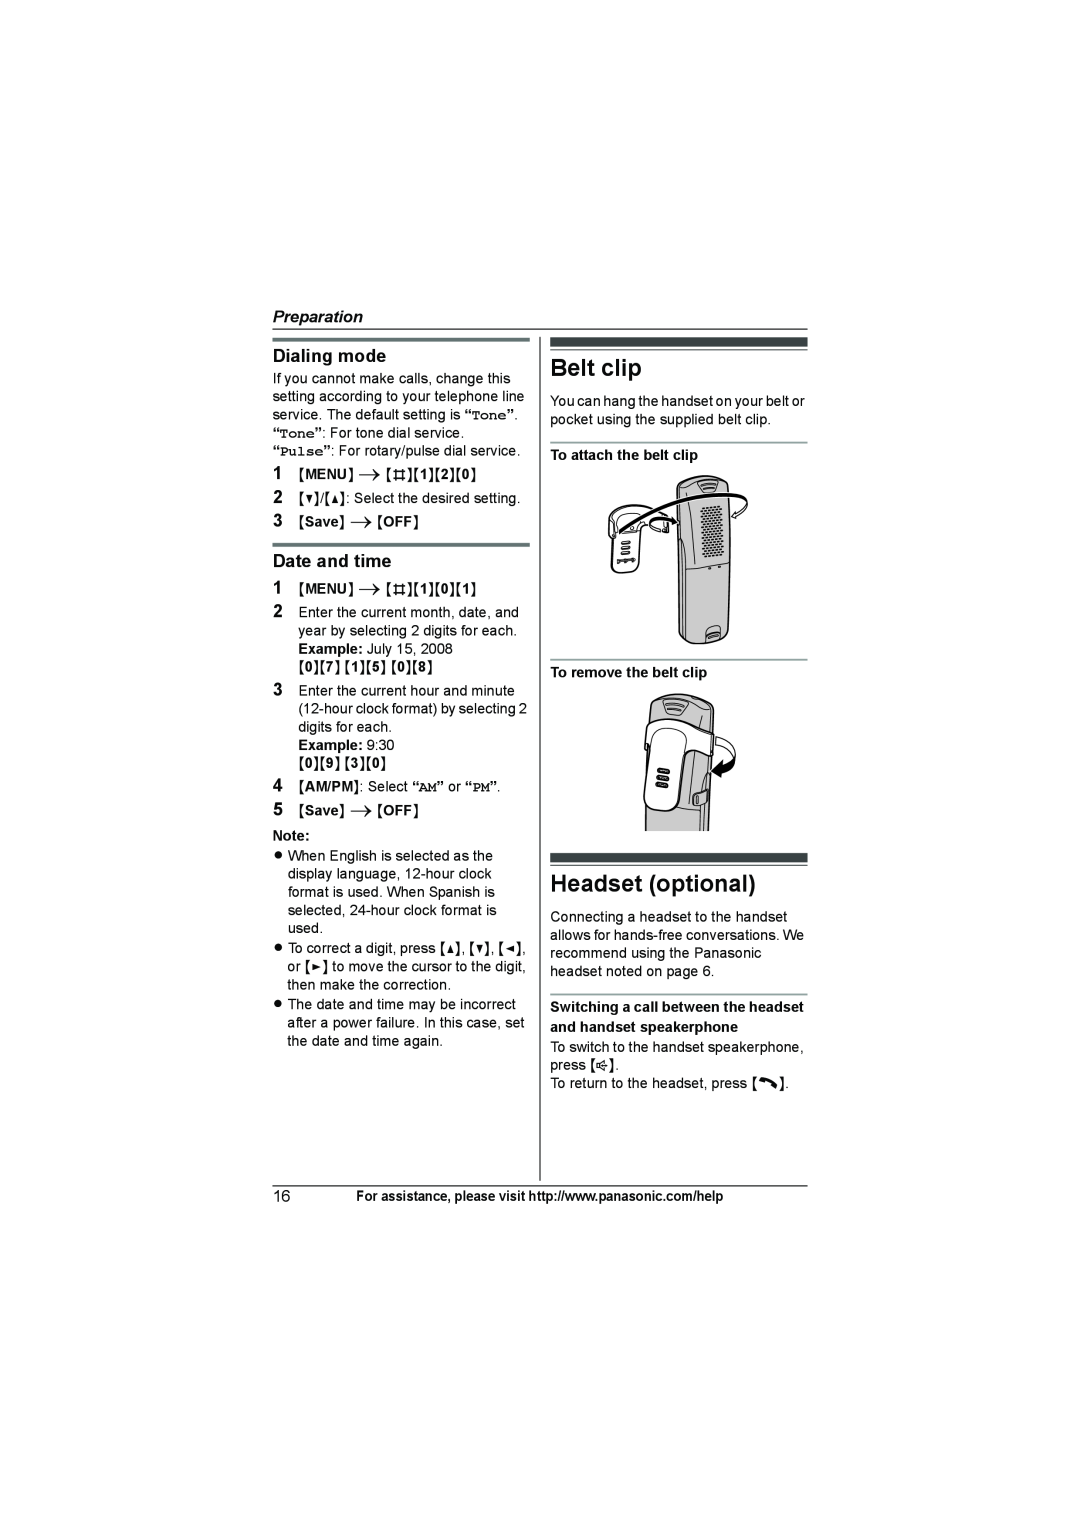 Panasonic KX-TG9372, KX-TG9361 Belt clip, Headset optional, Dialing mode, Date and time, Preparation, Save iOFF, Example 